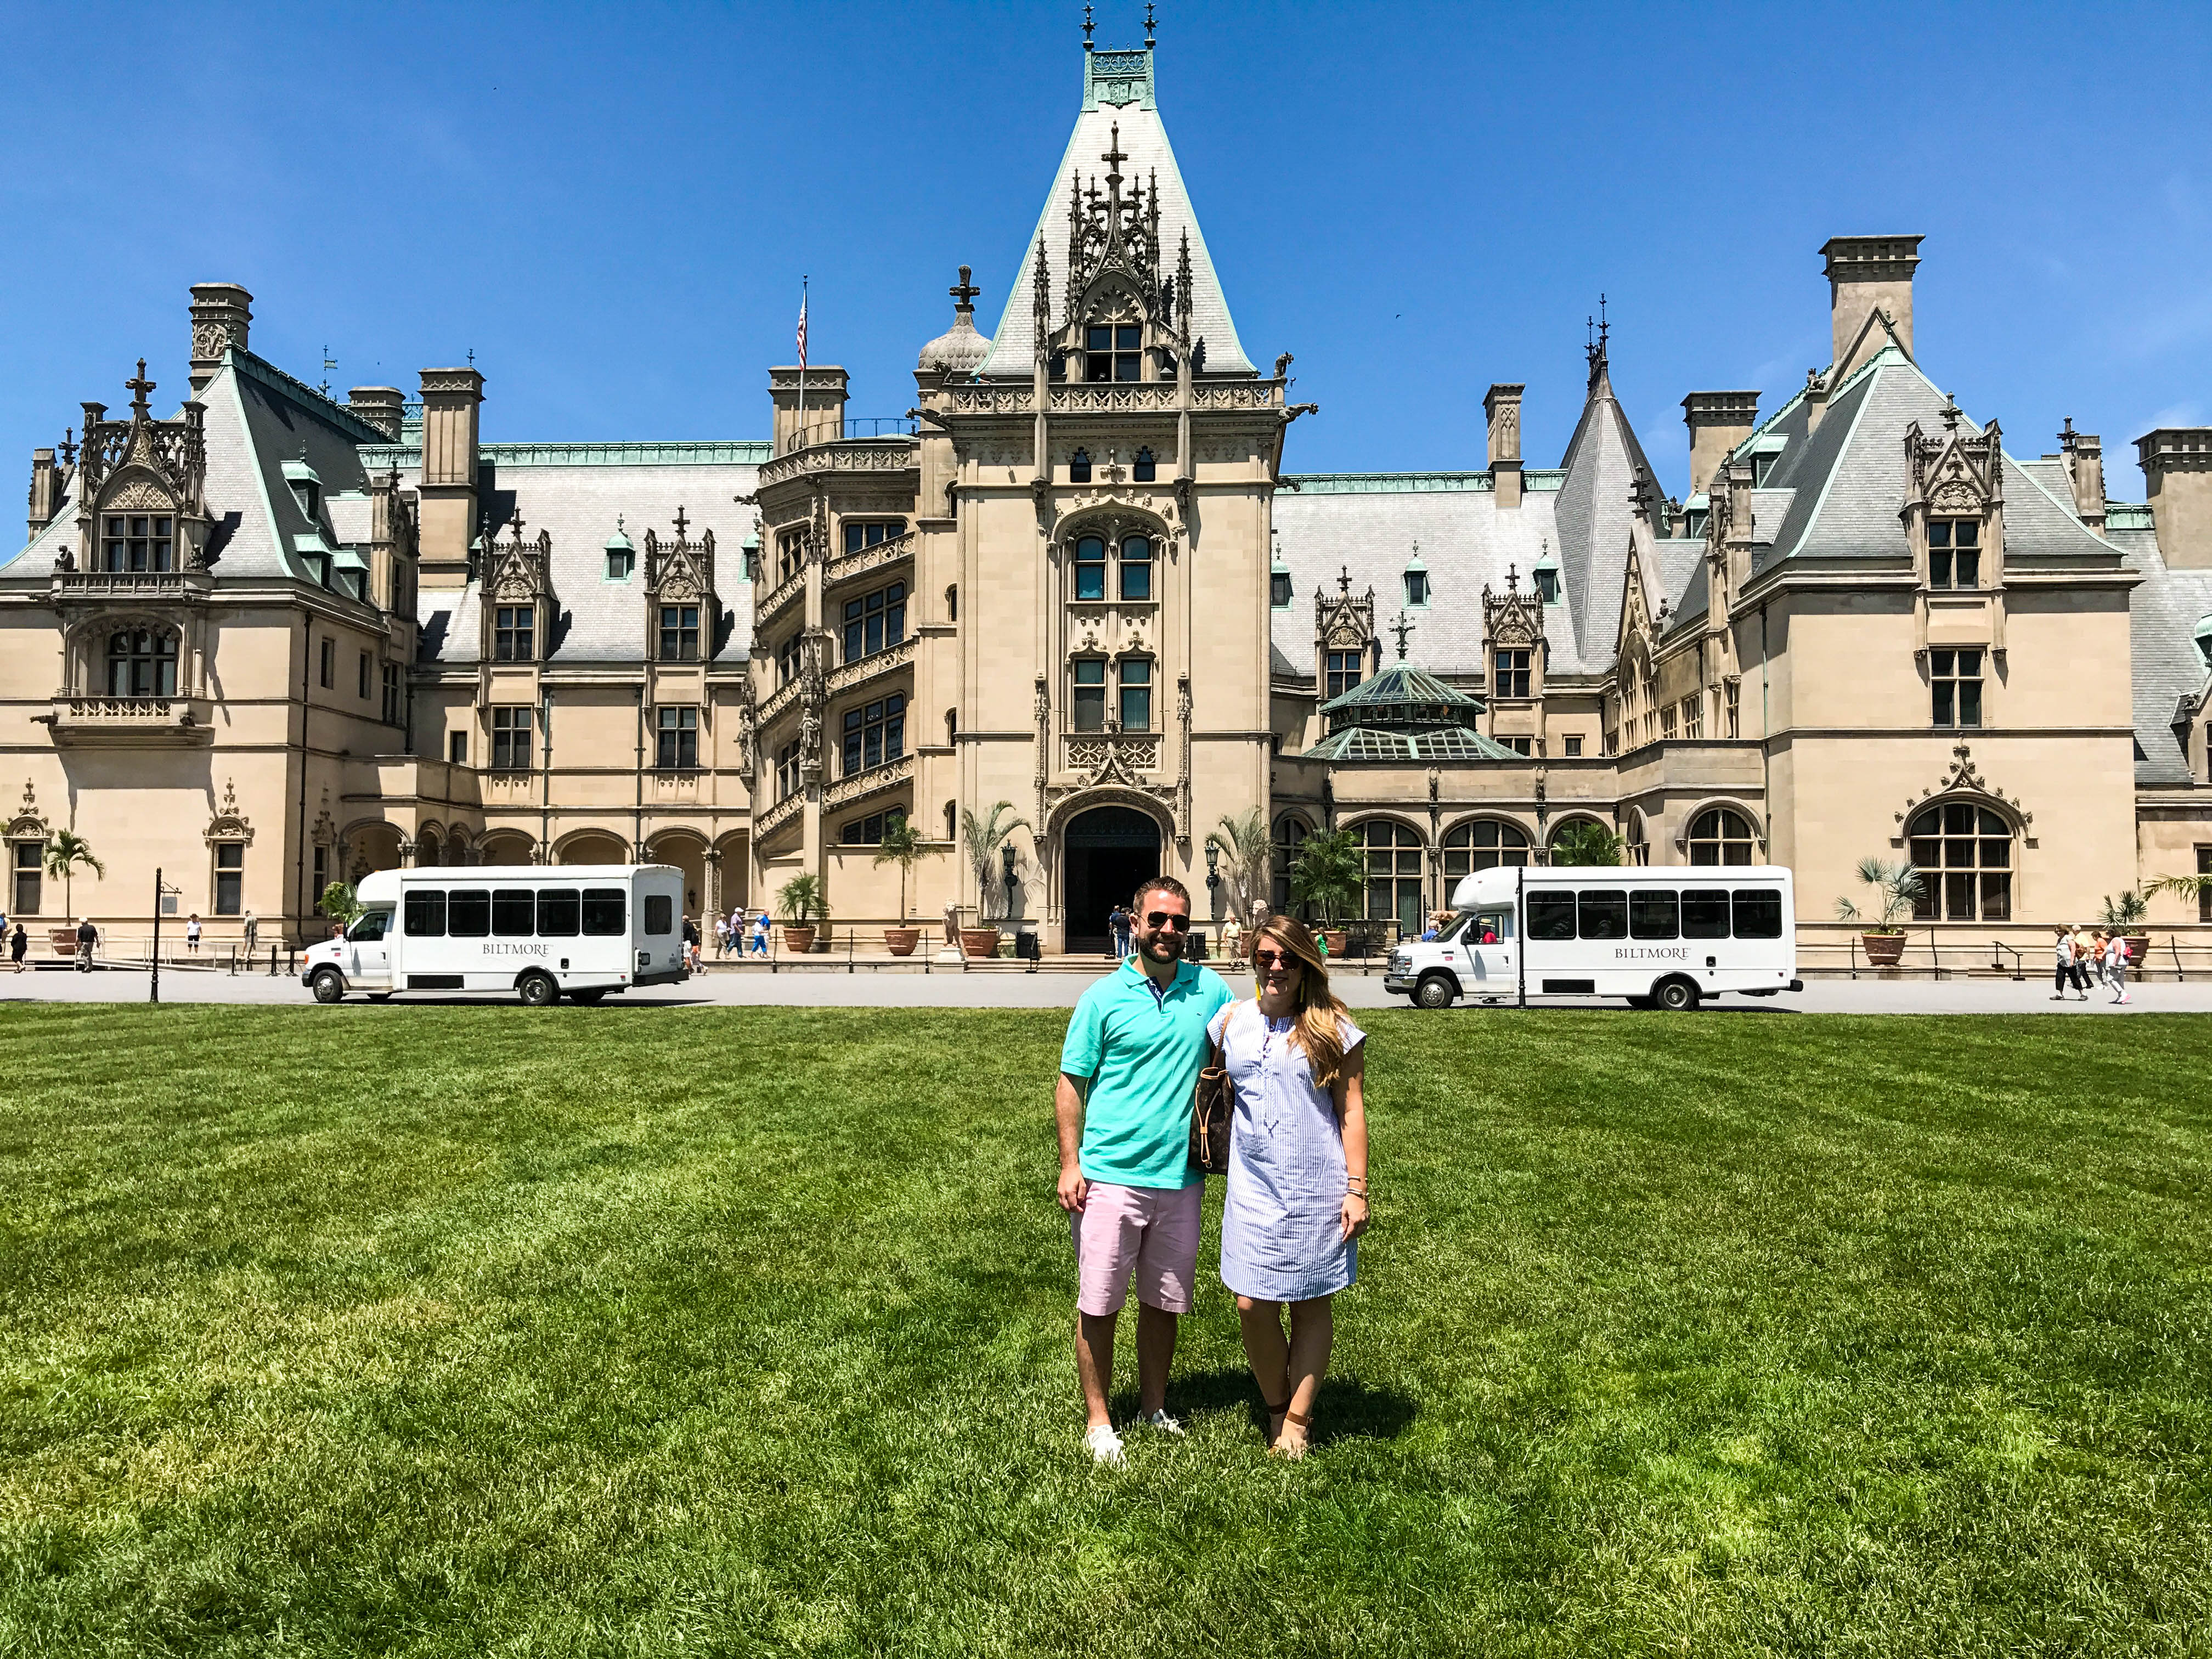 Is a Trip to the Biltmore Worth It?